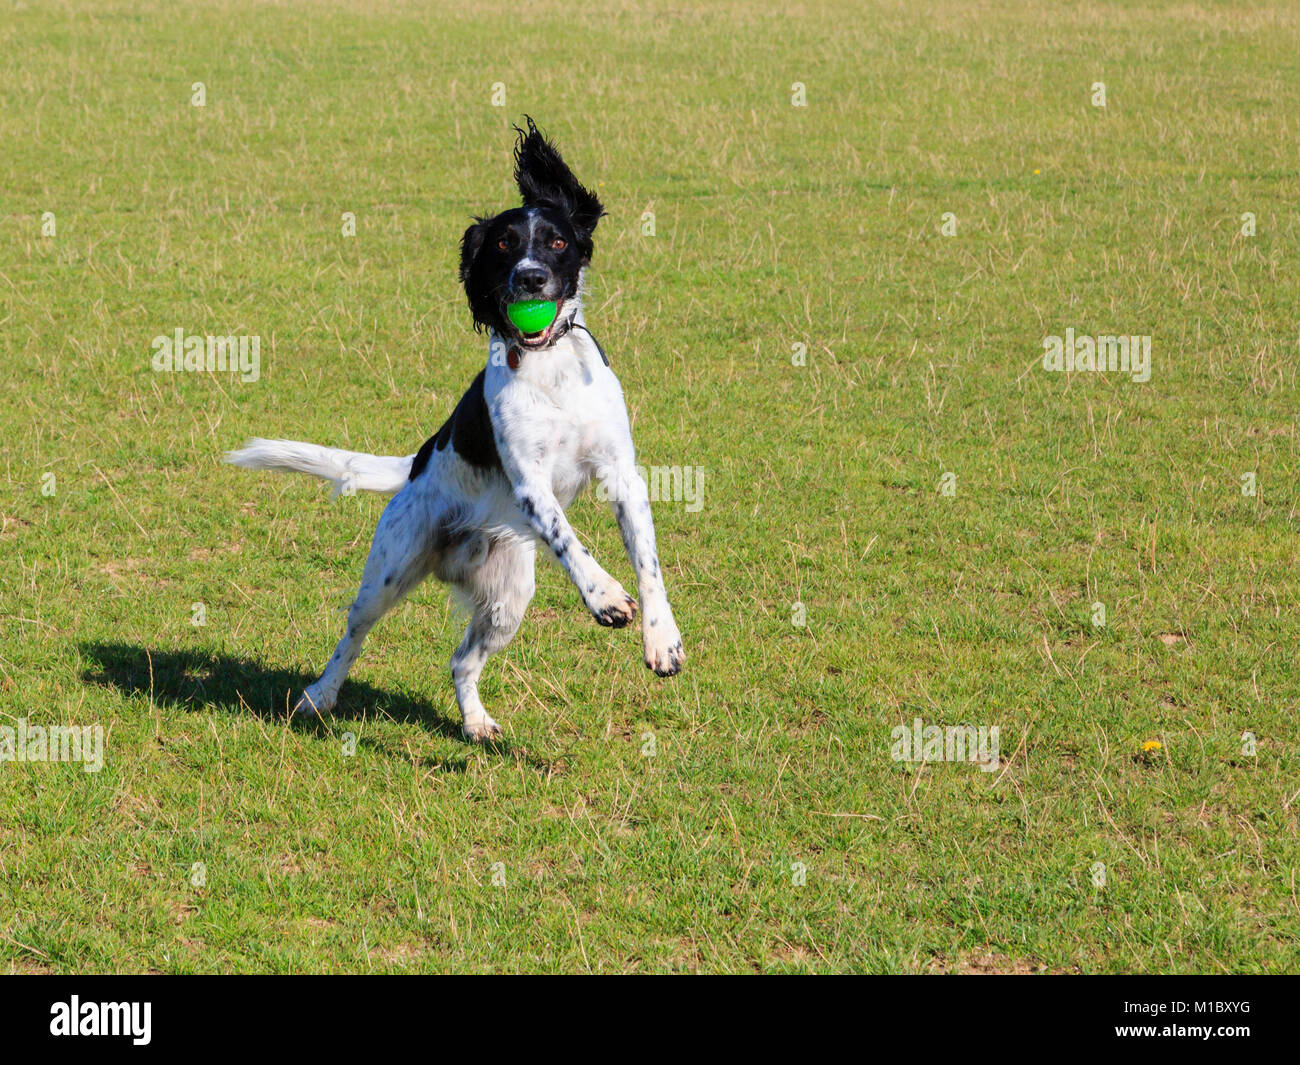 Black and White English Springer Spaniel dog standing on hind legs  jumping up to catch a ball in its mouth in a park. England, UK, Britain Stock Photo